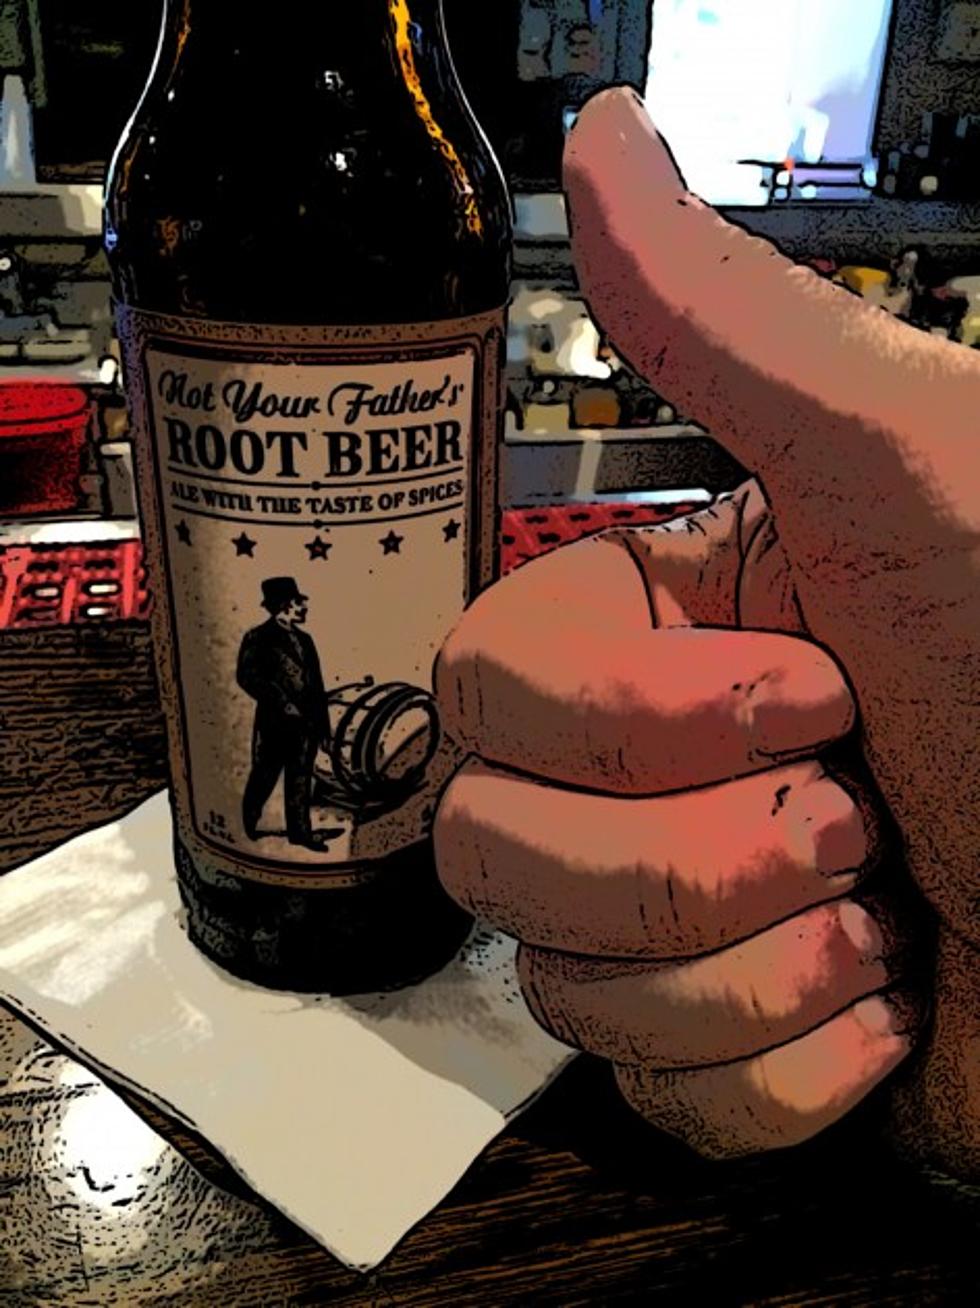 Celebrate Root Beer Float Day Today With an Adult Root Beer Float!